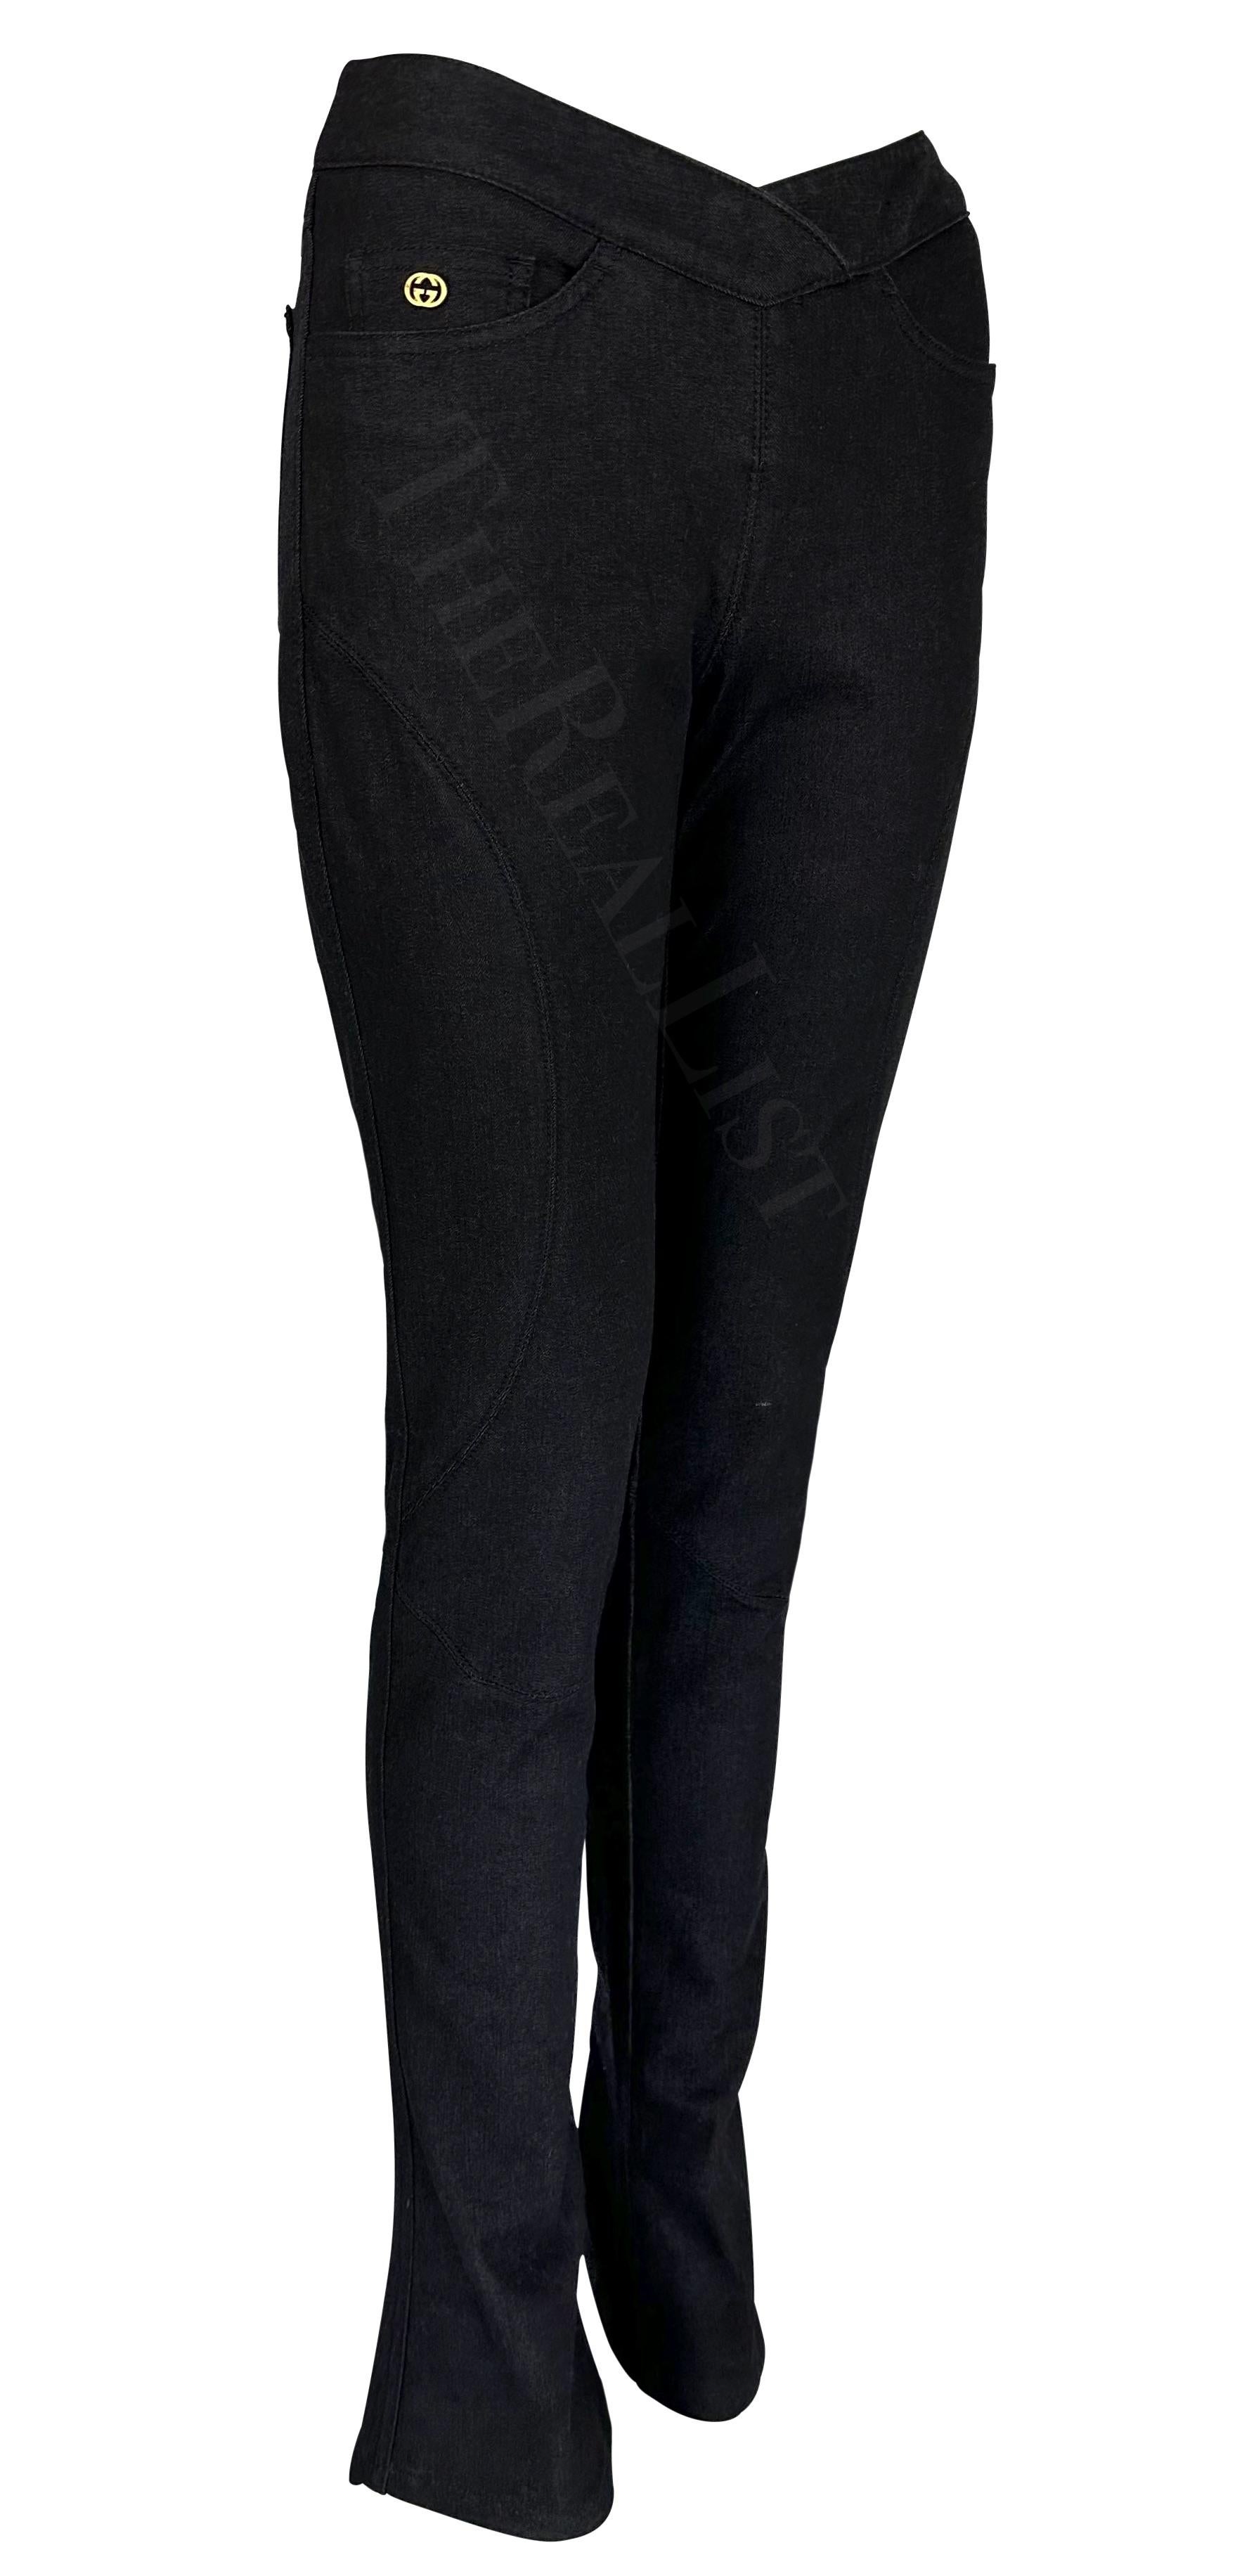 Presenting a pair of black denim Gucci jeans, designed by Tom Ford. From 2003, these fitted pants feature a flare at the hem, an angular cut waist, and a gold-tone 'GG' accent at one pocket.

Approximate measurements:
Size - 38IT
Waist: 28